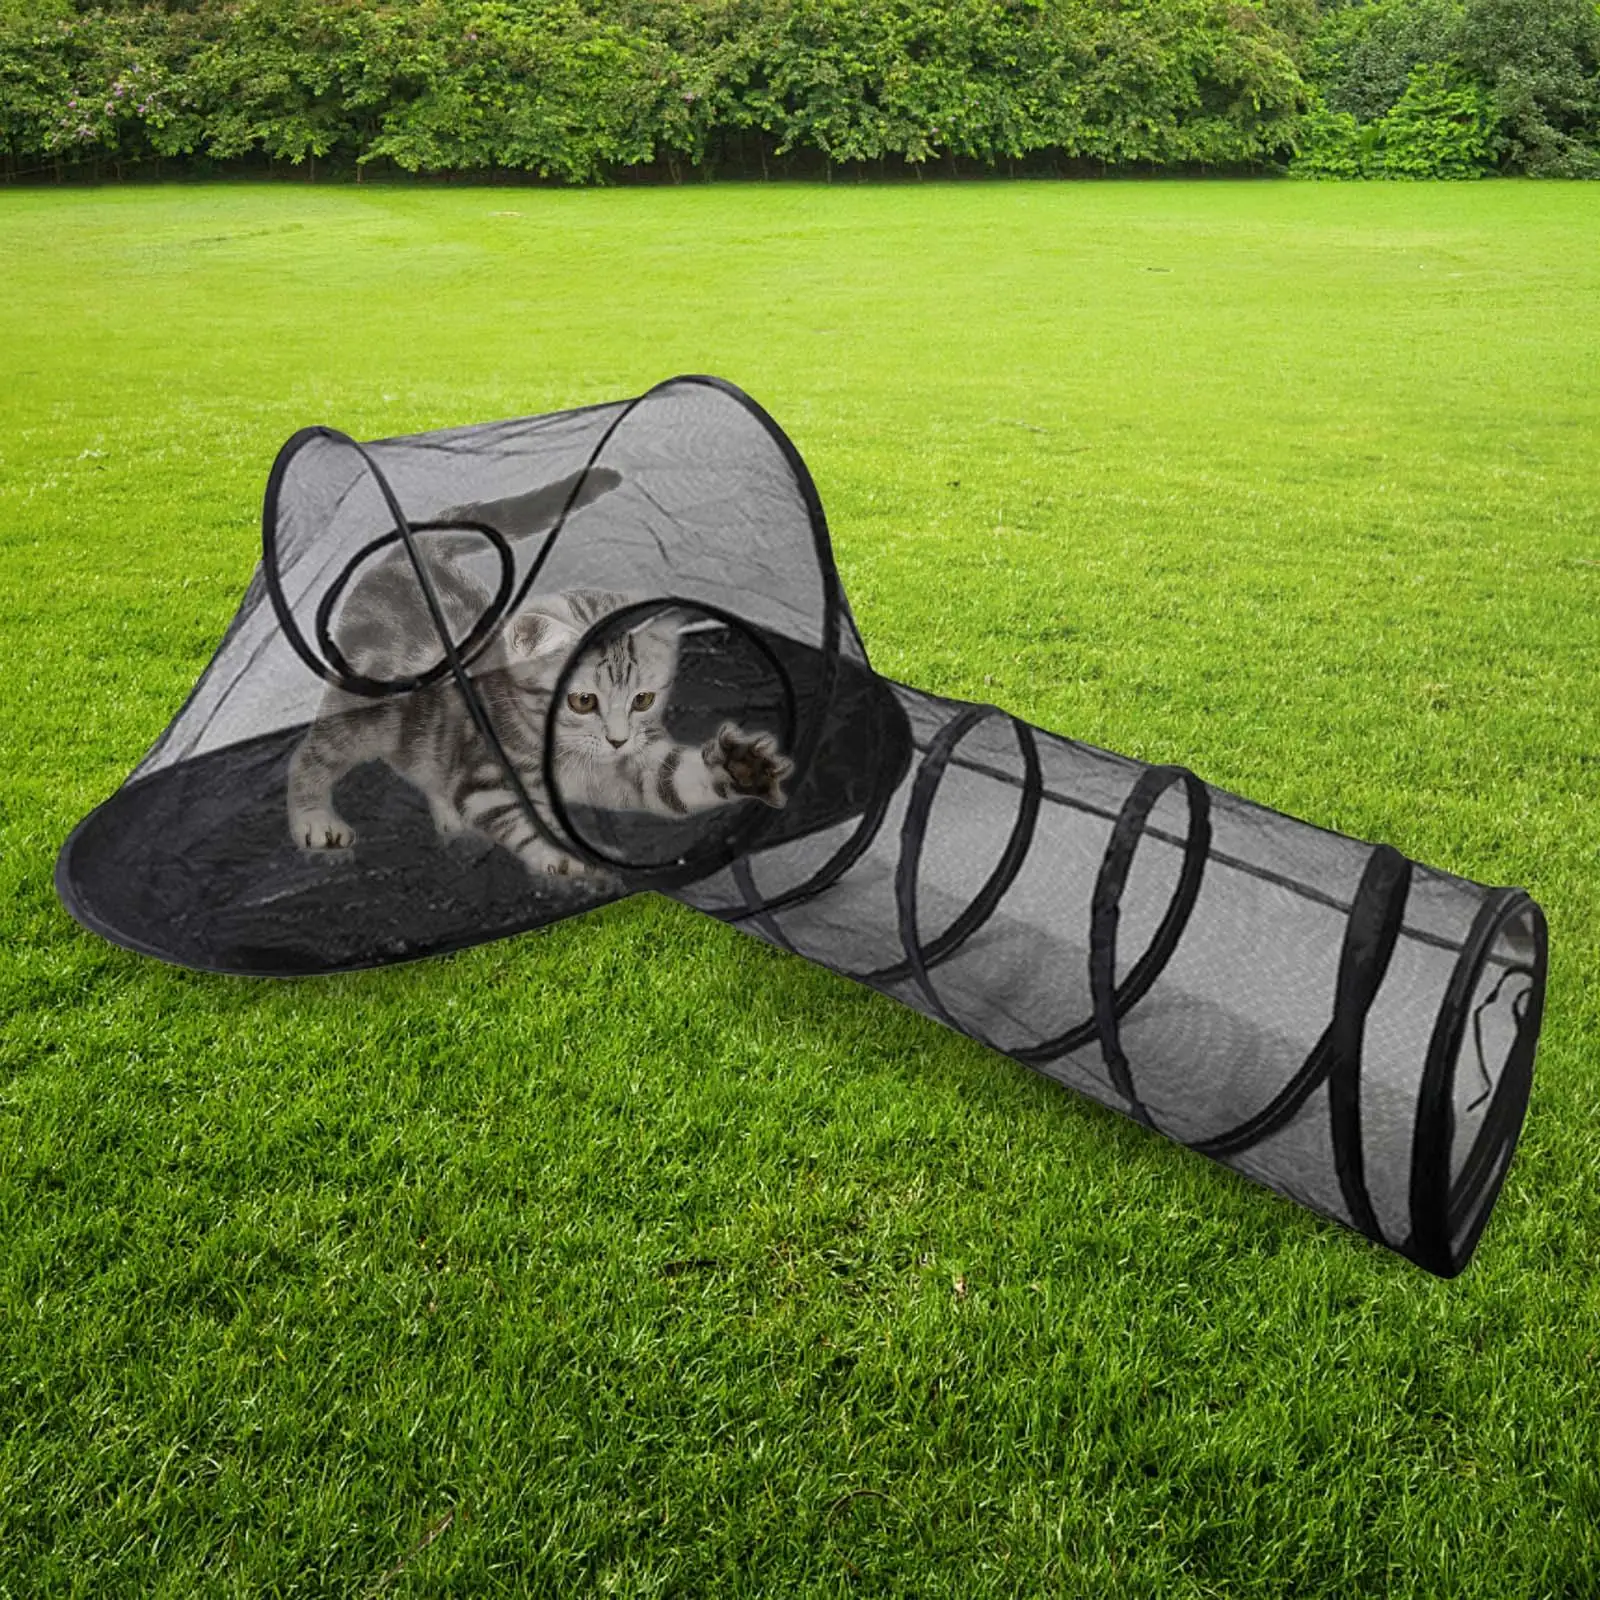 Cat Tent and Tunnel Outdoor Collapsible Pets Activity Center Breathable Mesh for Rabbits Cats Puppy Rabbit Small Animals